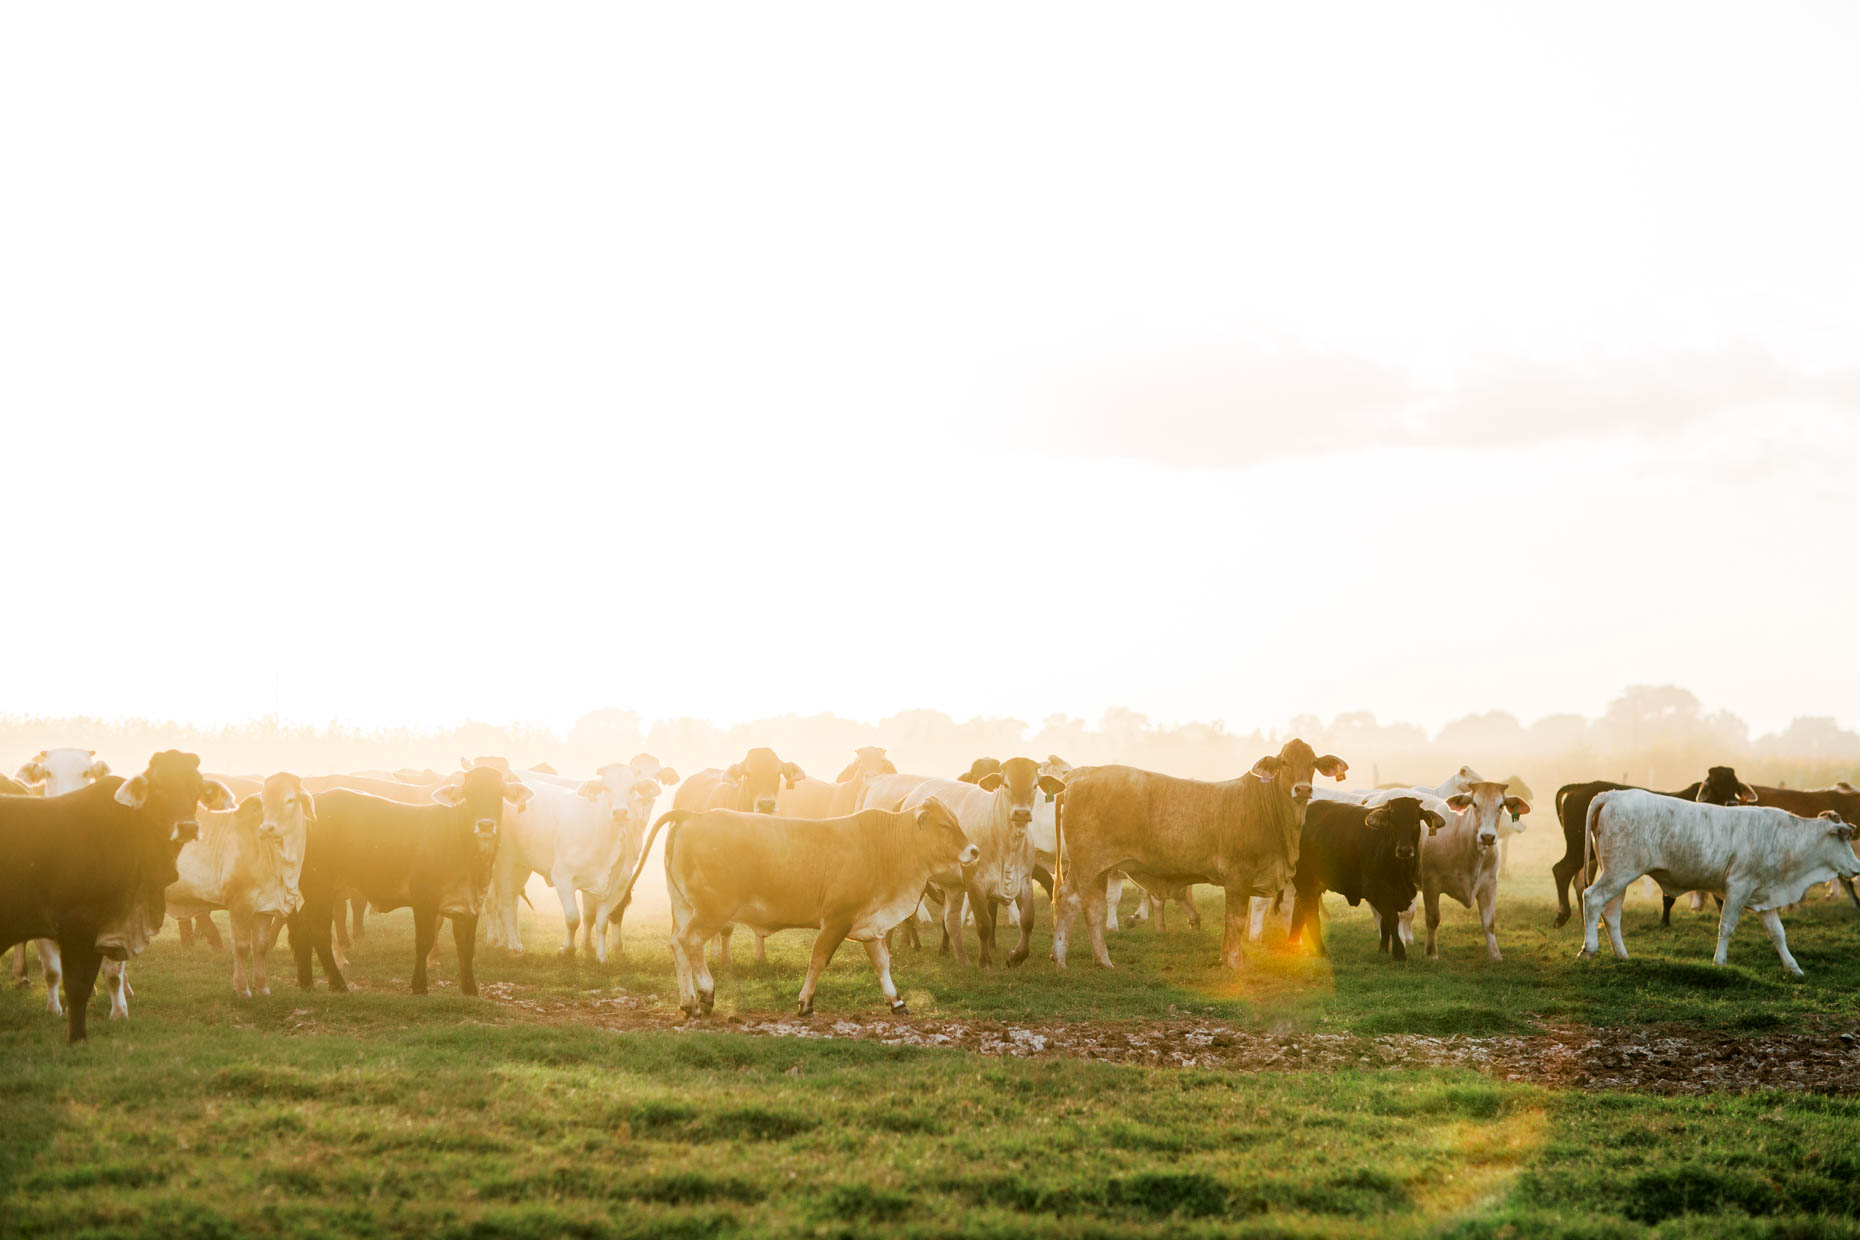 Texas cattle at sunset